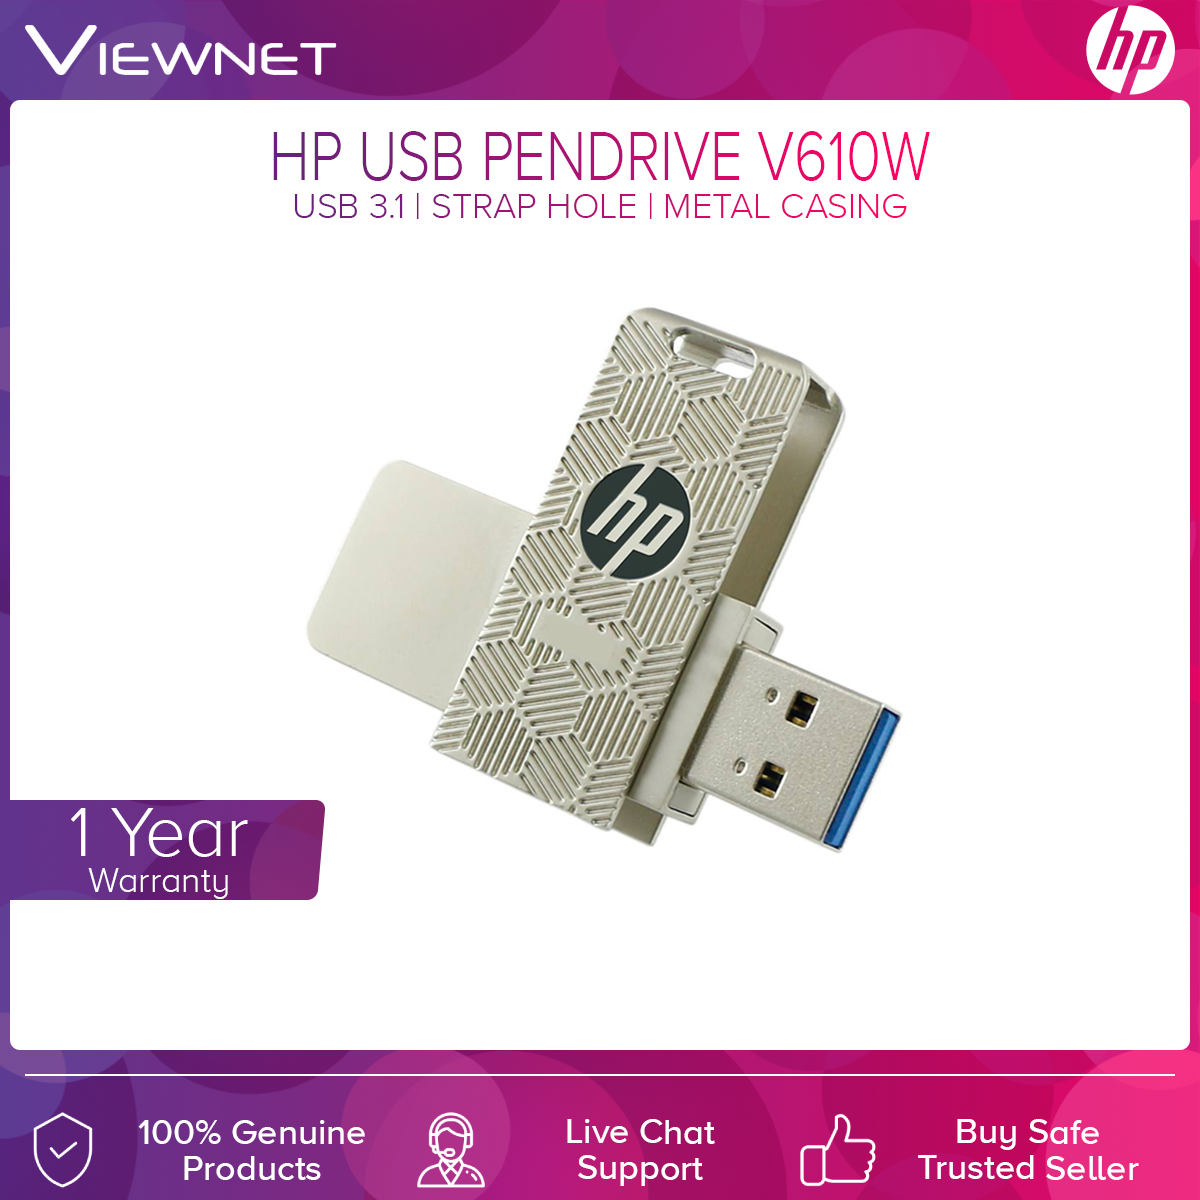 HP USB Pendrive X610W with USB 3.1 Connection, Metal Casing, Rotate To Open, Strap Hole